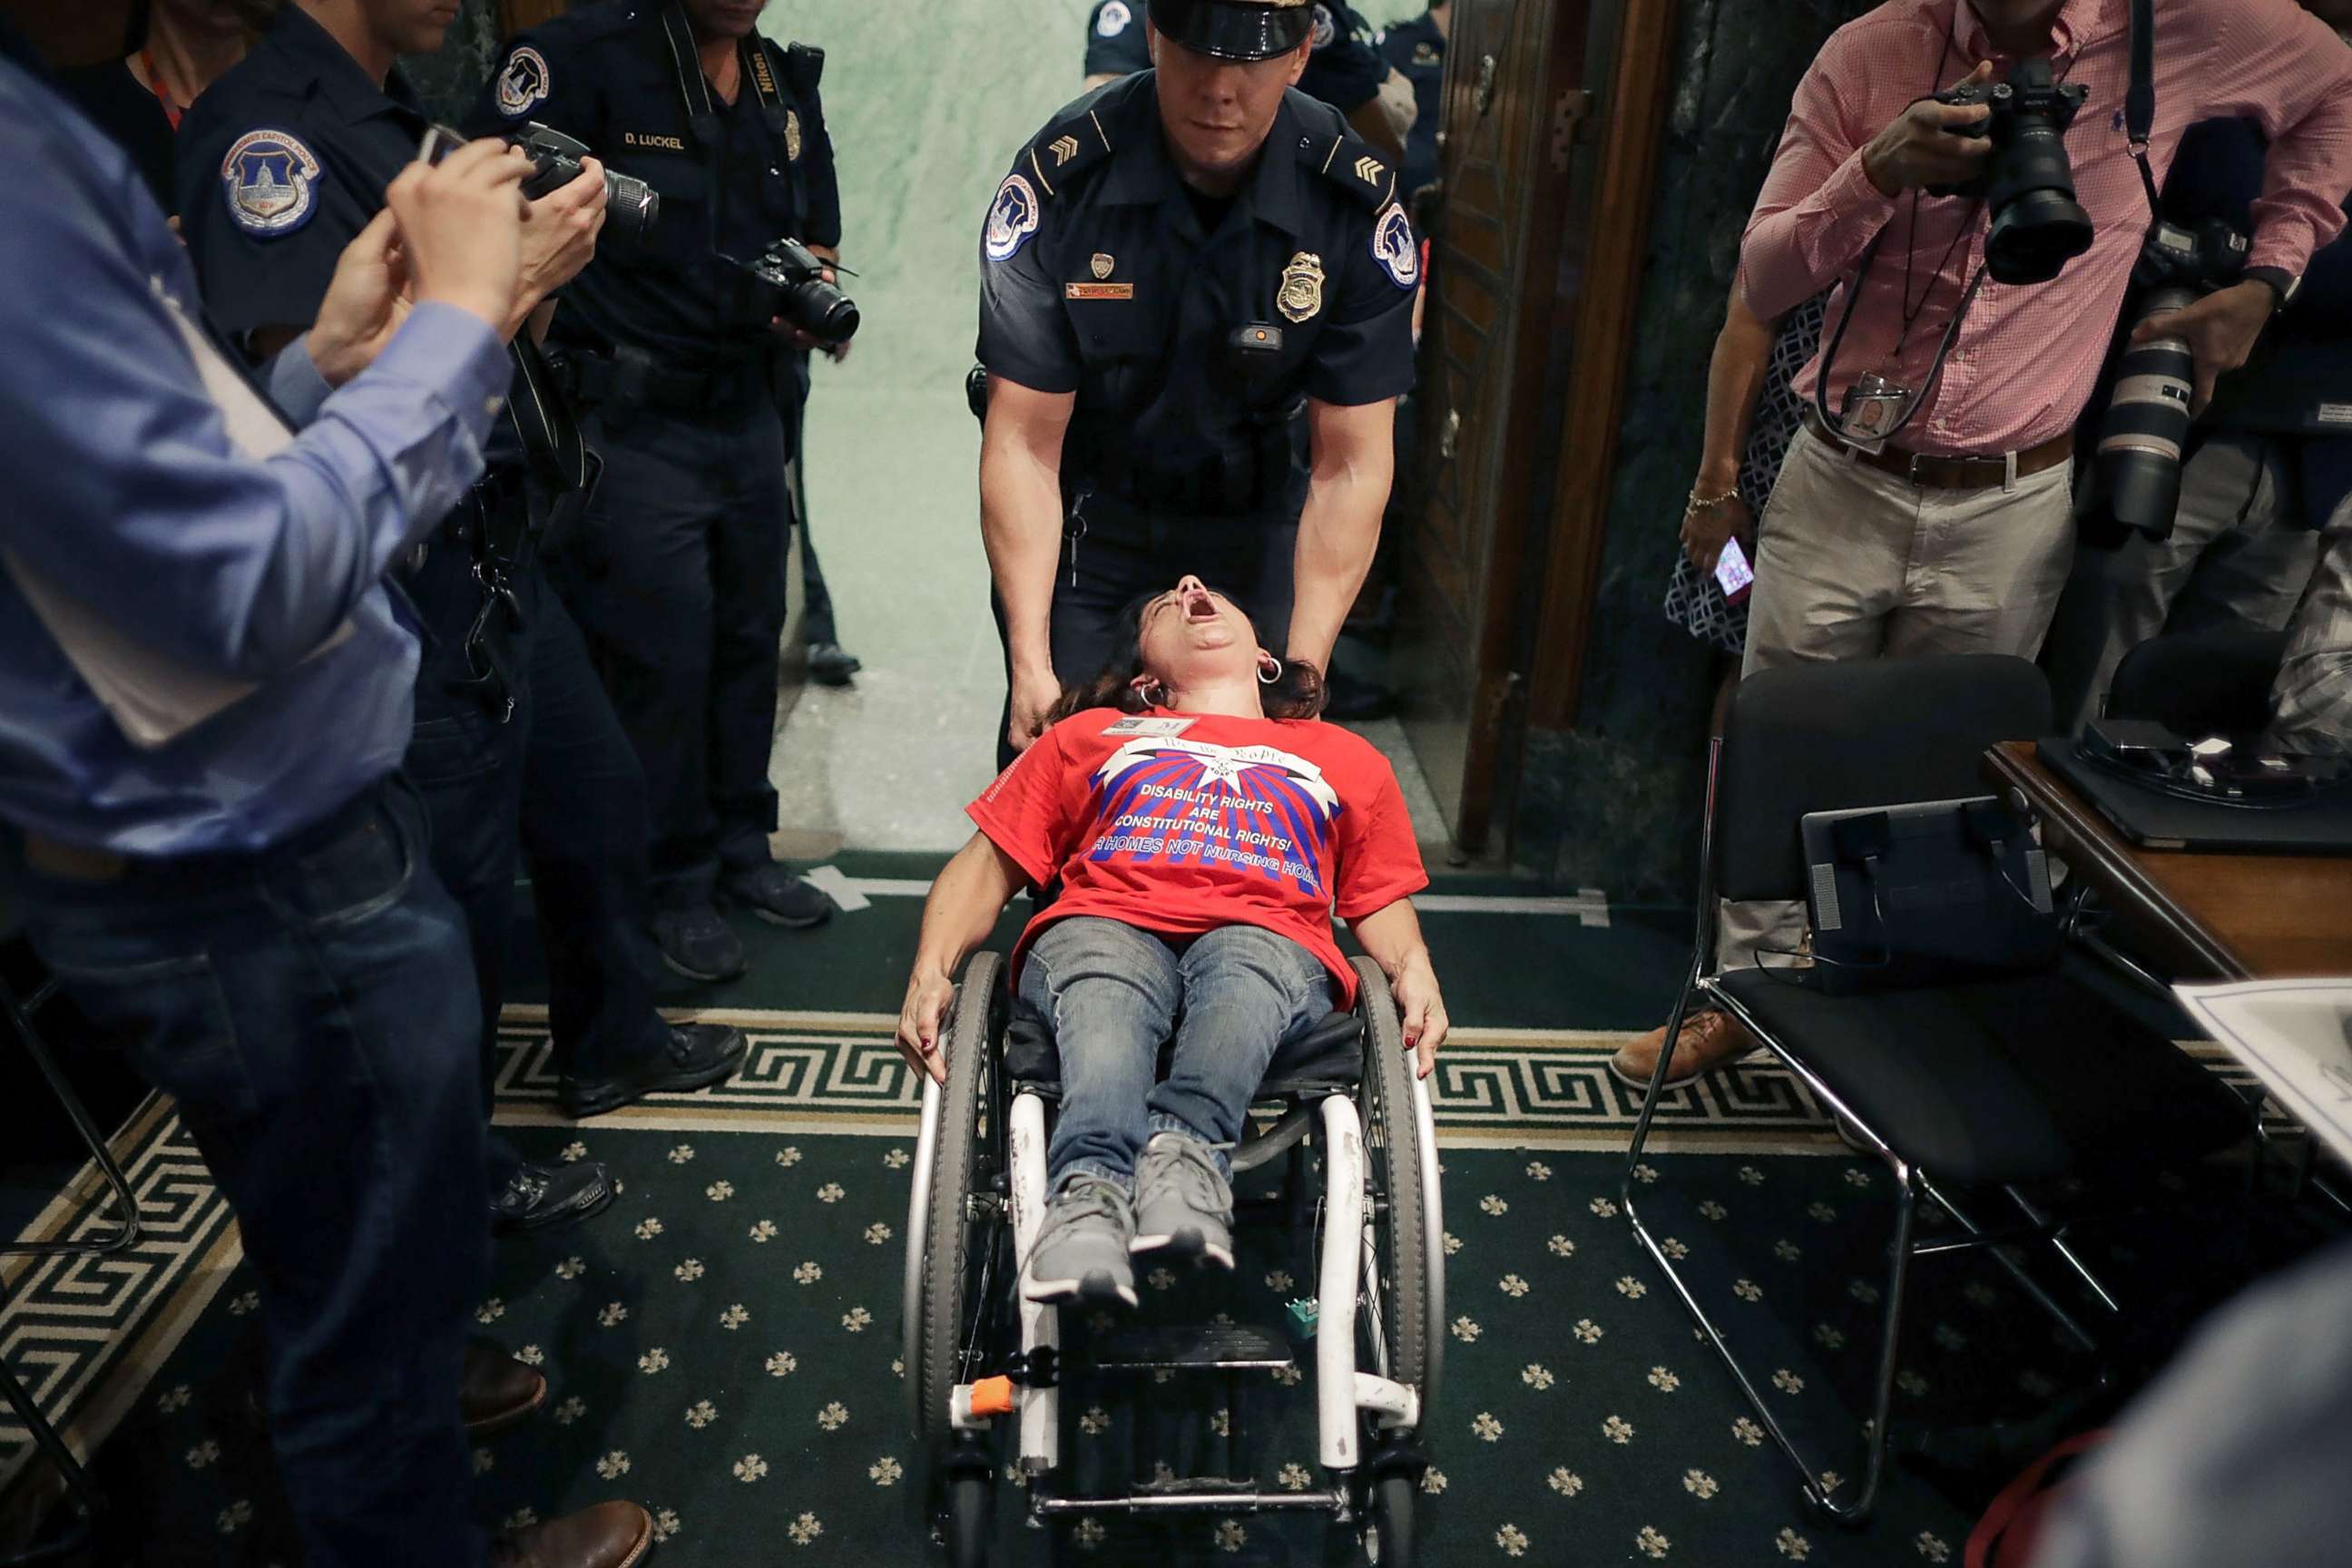 PHOTO: Capitol Police remove a protester in a wheel chair from a Senate Finance Committee hearing about the proposed Graham-Cassidy healthcare bill in the Dirksen Senate Office Building on Capitol Hill, Sept. 25, 2017, in Washington.